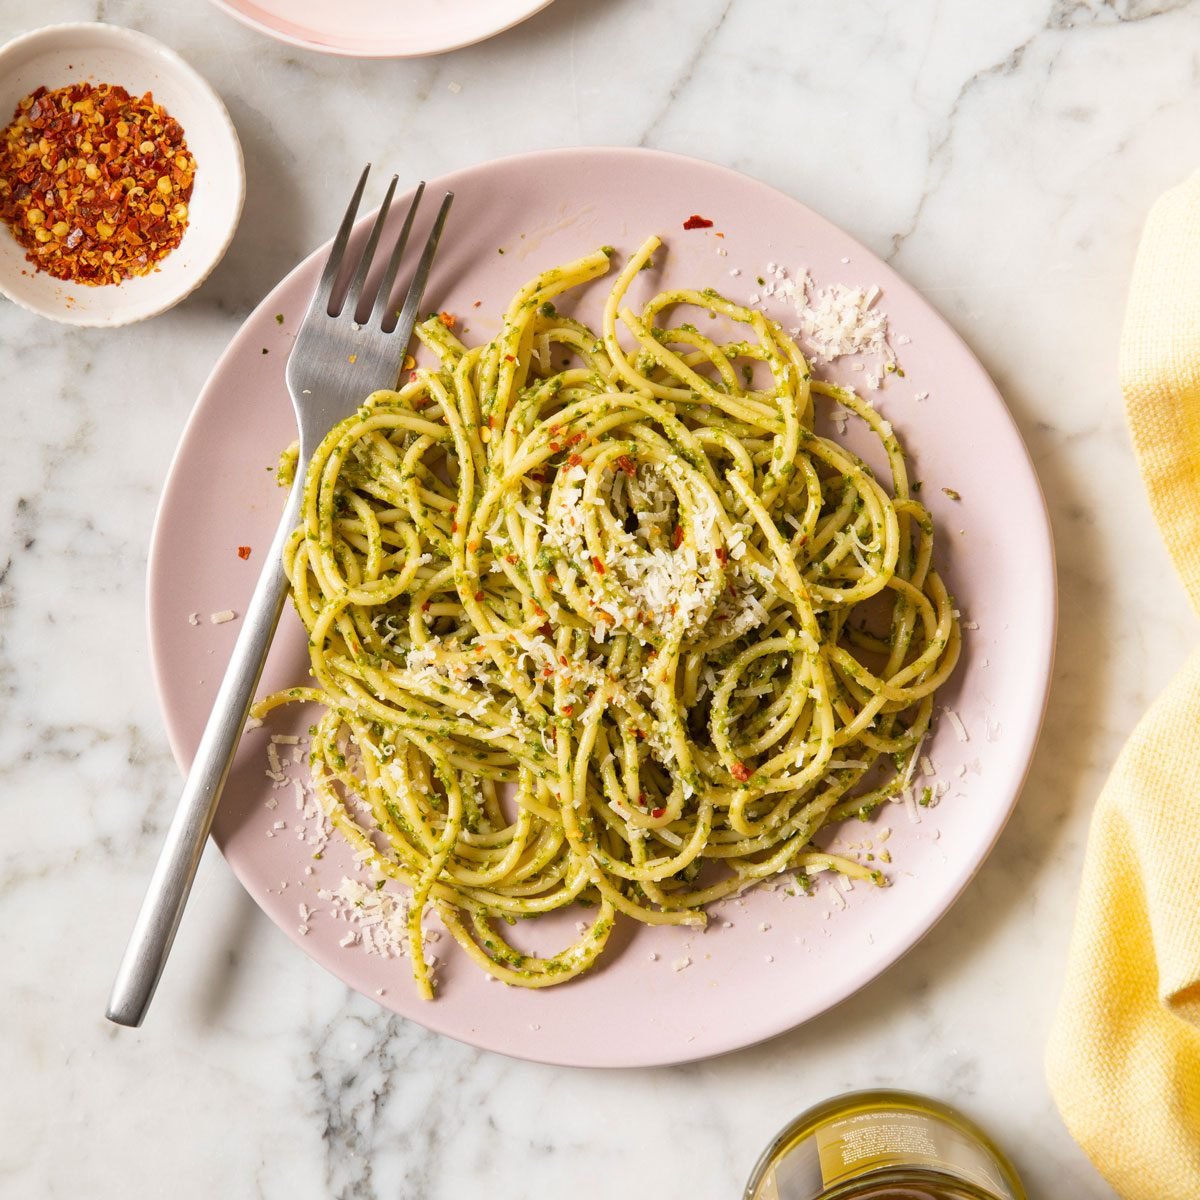 How to Make Pesto Pasta in Just 15 Minutes